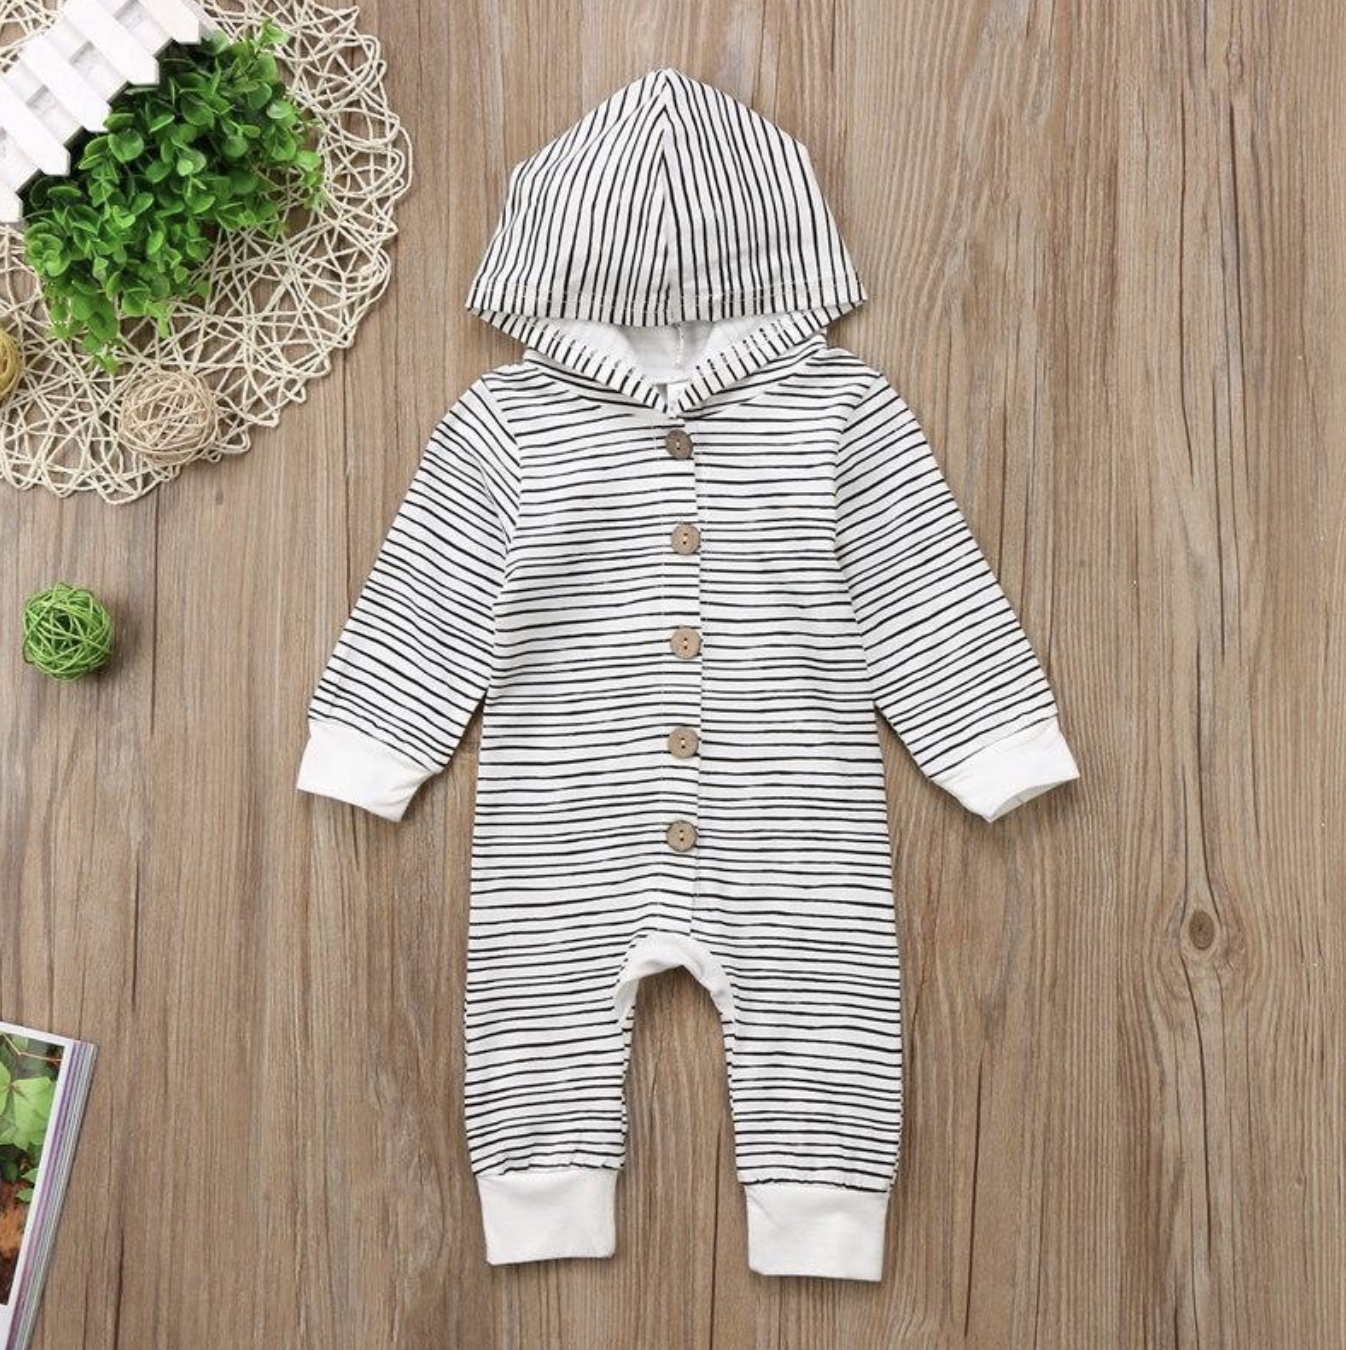  boutique boy clothes, boutique girl clothes, where to get photo clothes, the best place for photo clothes, what to wear for family photos, what to wear for baby photos, what to dress baby in for pictures, boy rompers, girl rompers, girl dresses, bou